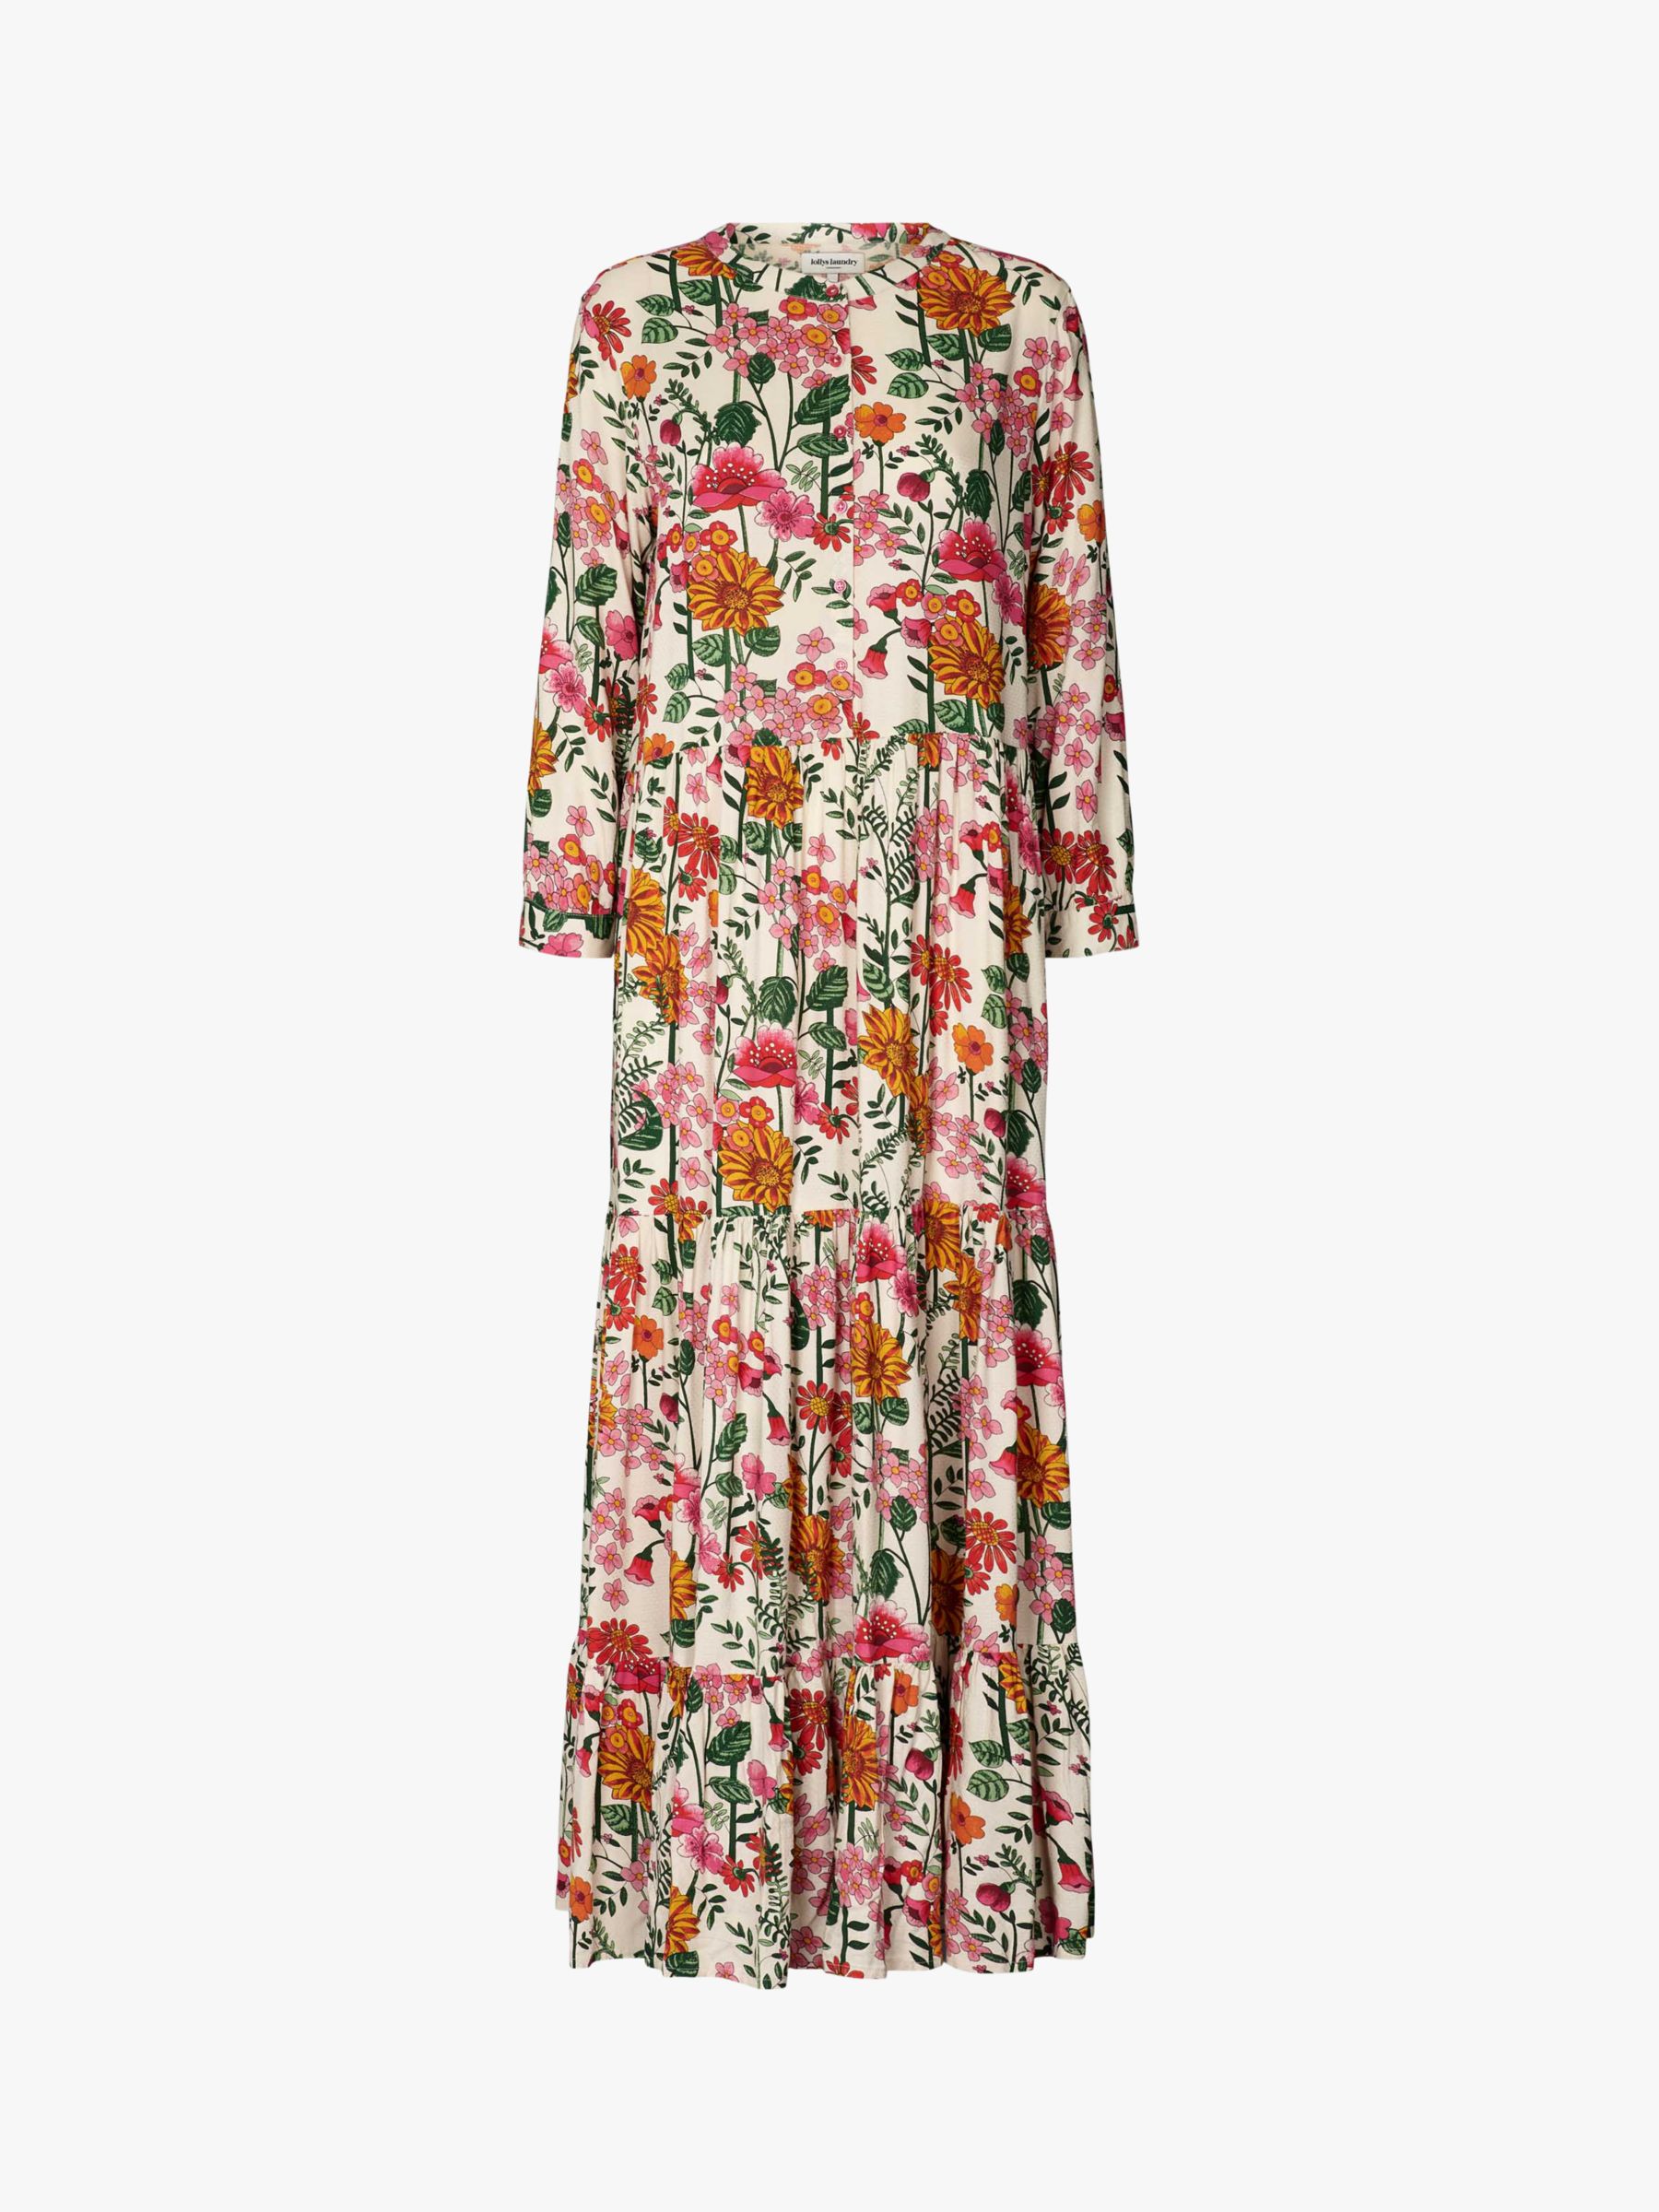 Lollys Laundry Nee Floral Tiered Maxi Dress, Multi at John Lewis & Partners